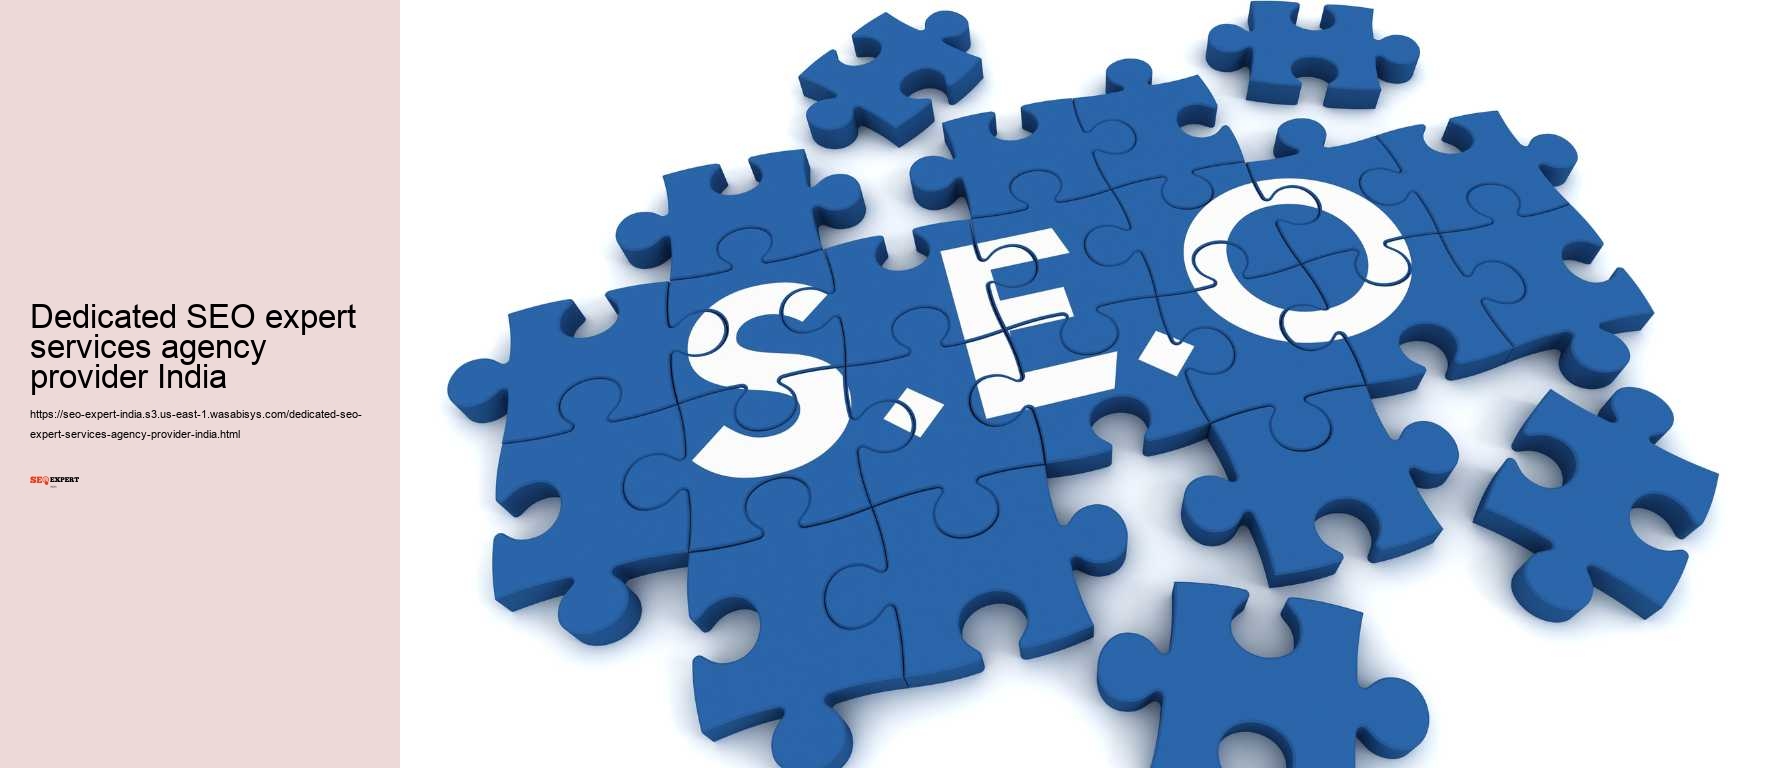 Dedicated SEO expert services agency provider India